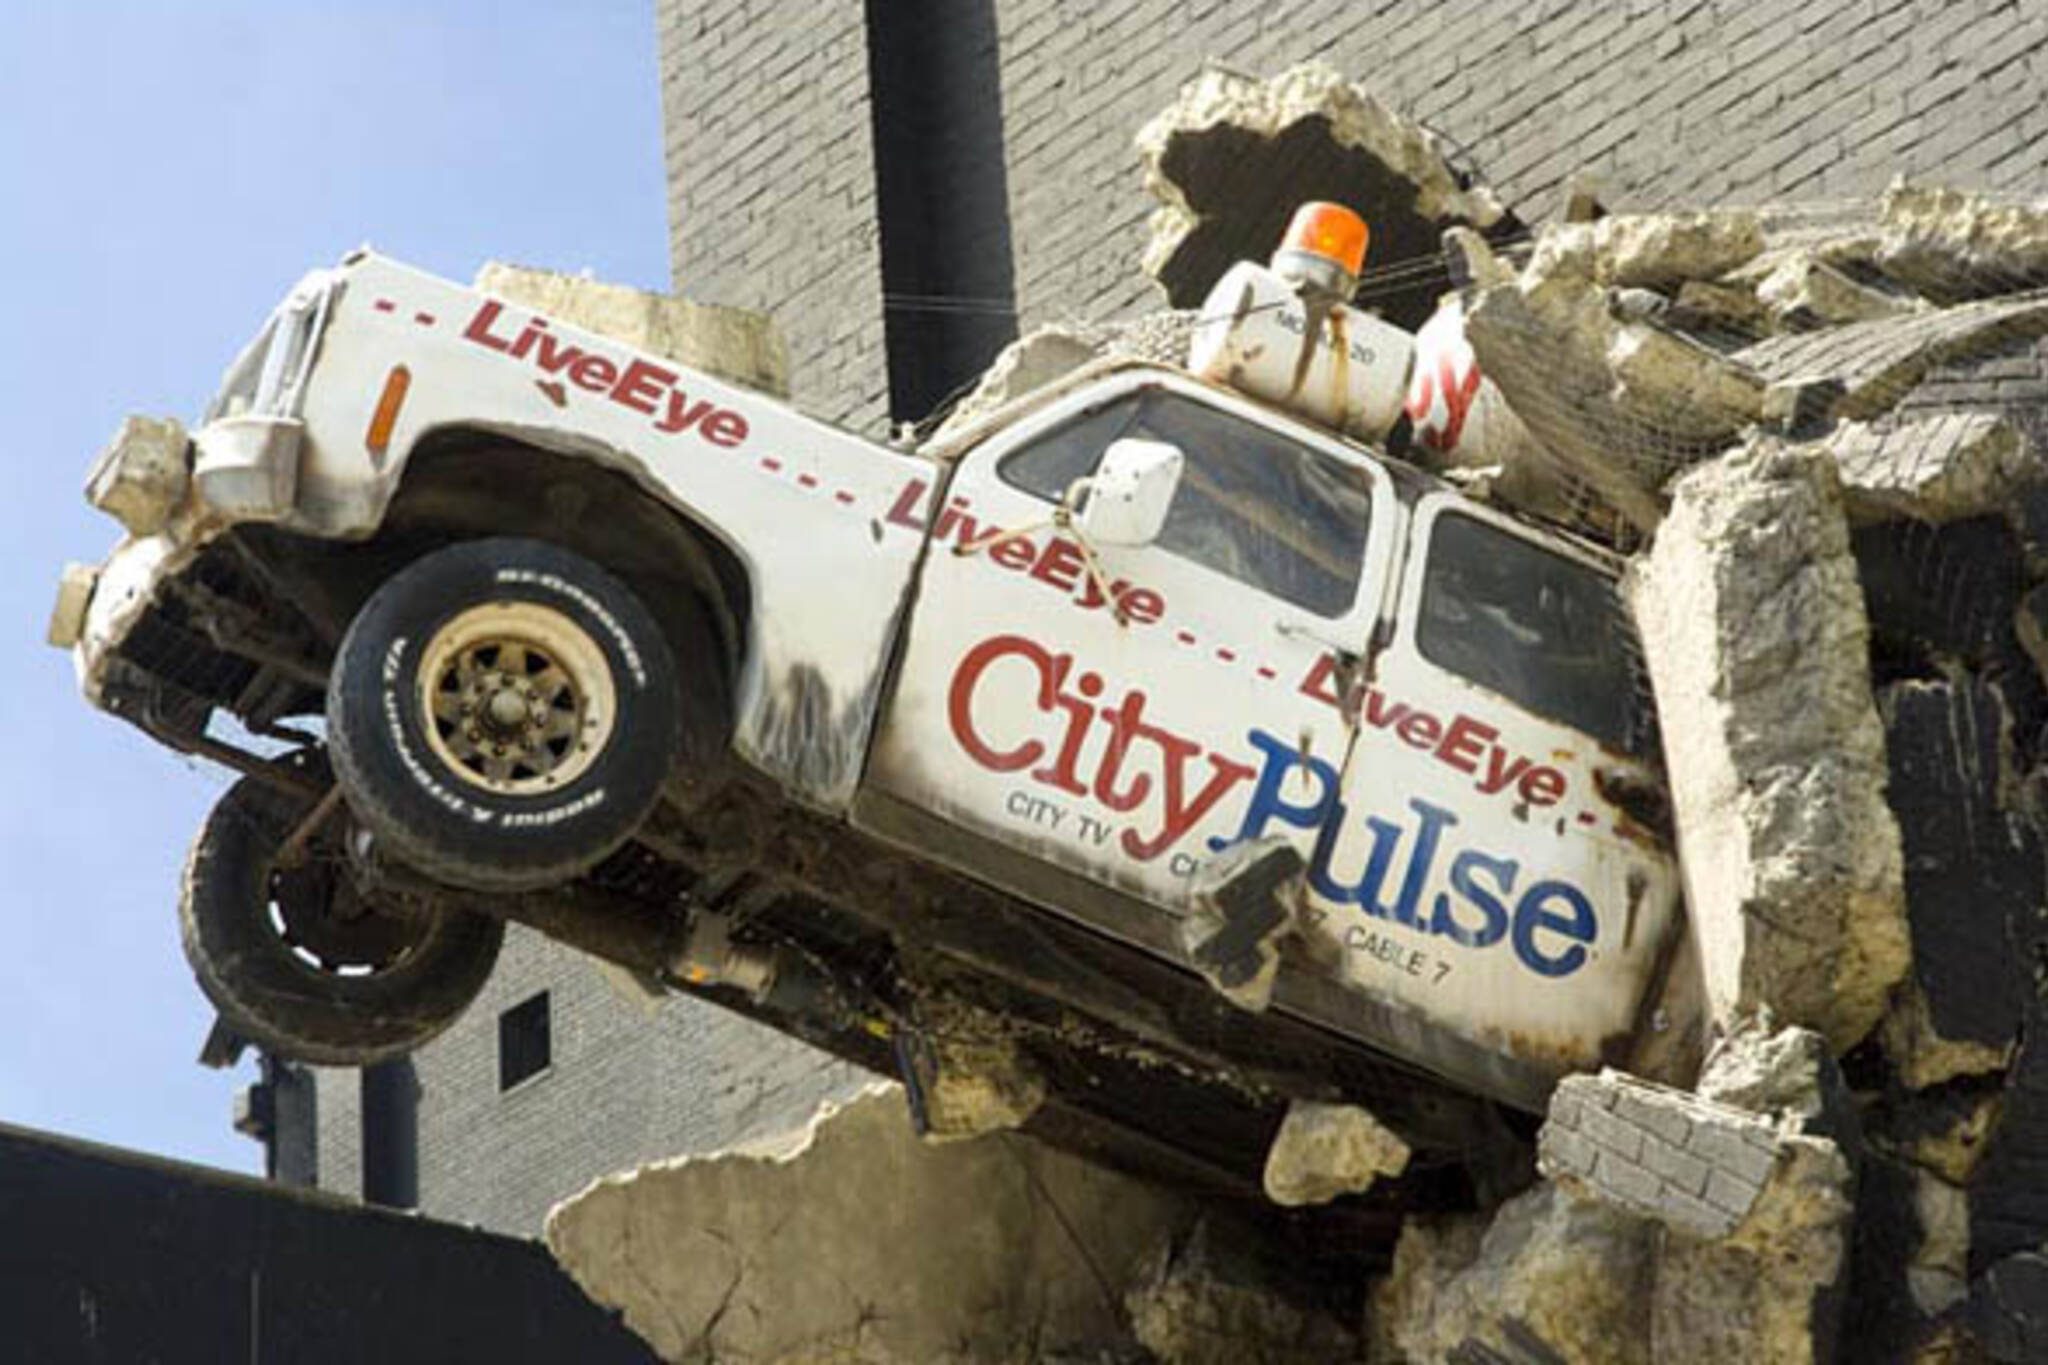 City Pulse Truck at the CHUM Headquarters